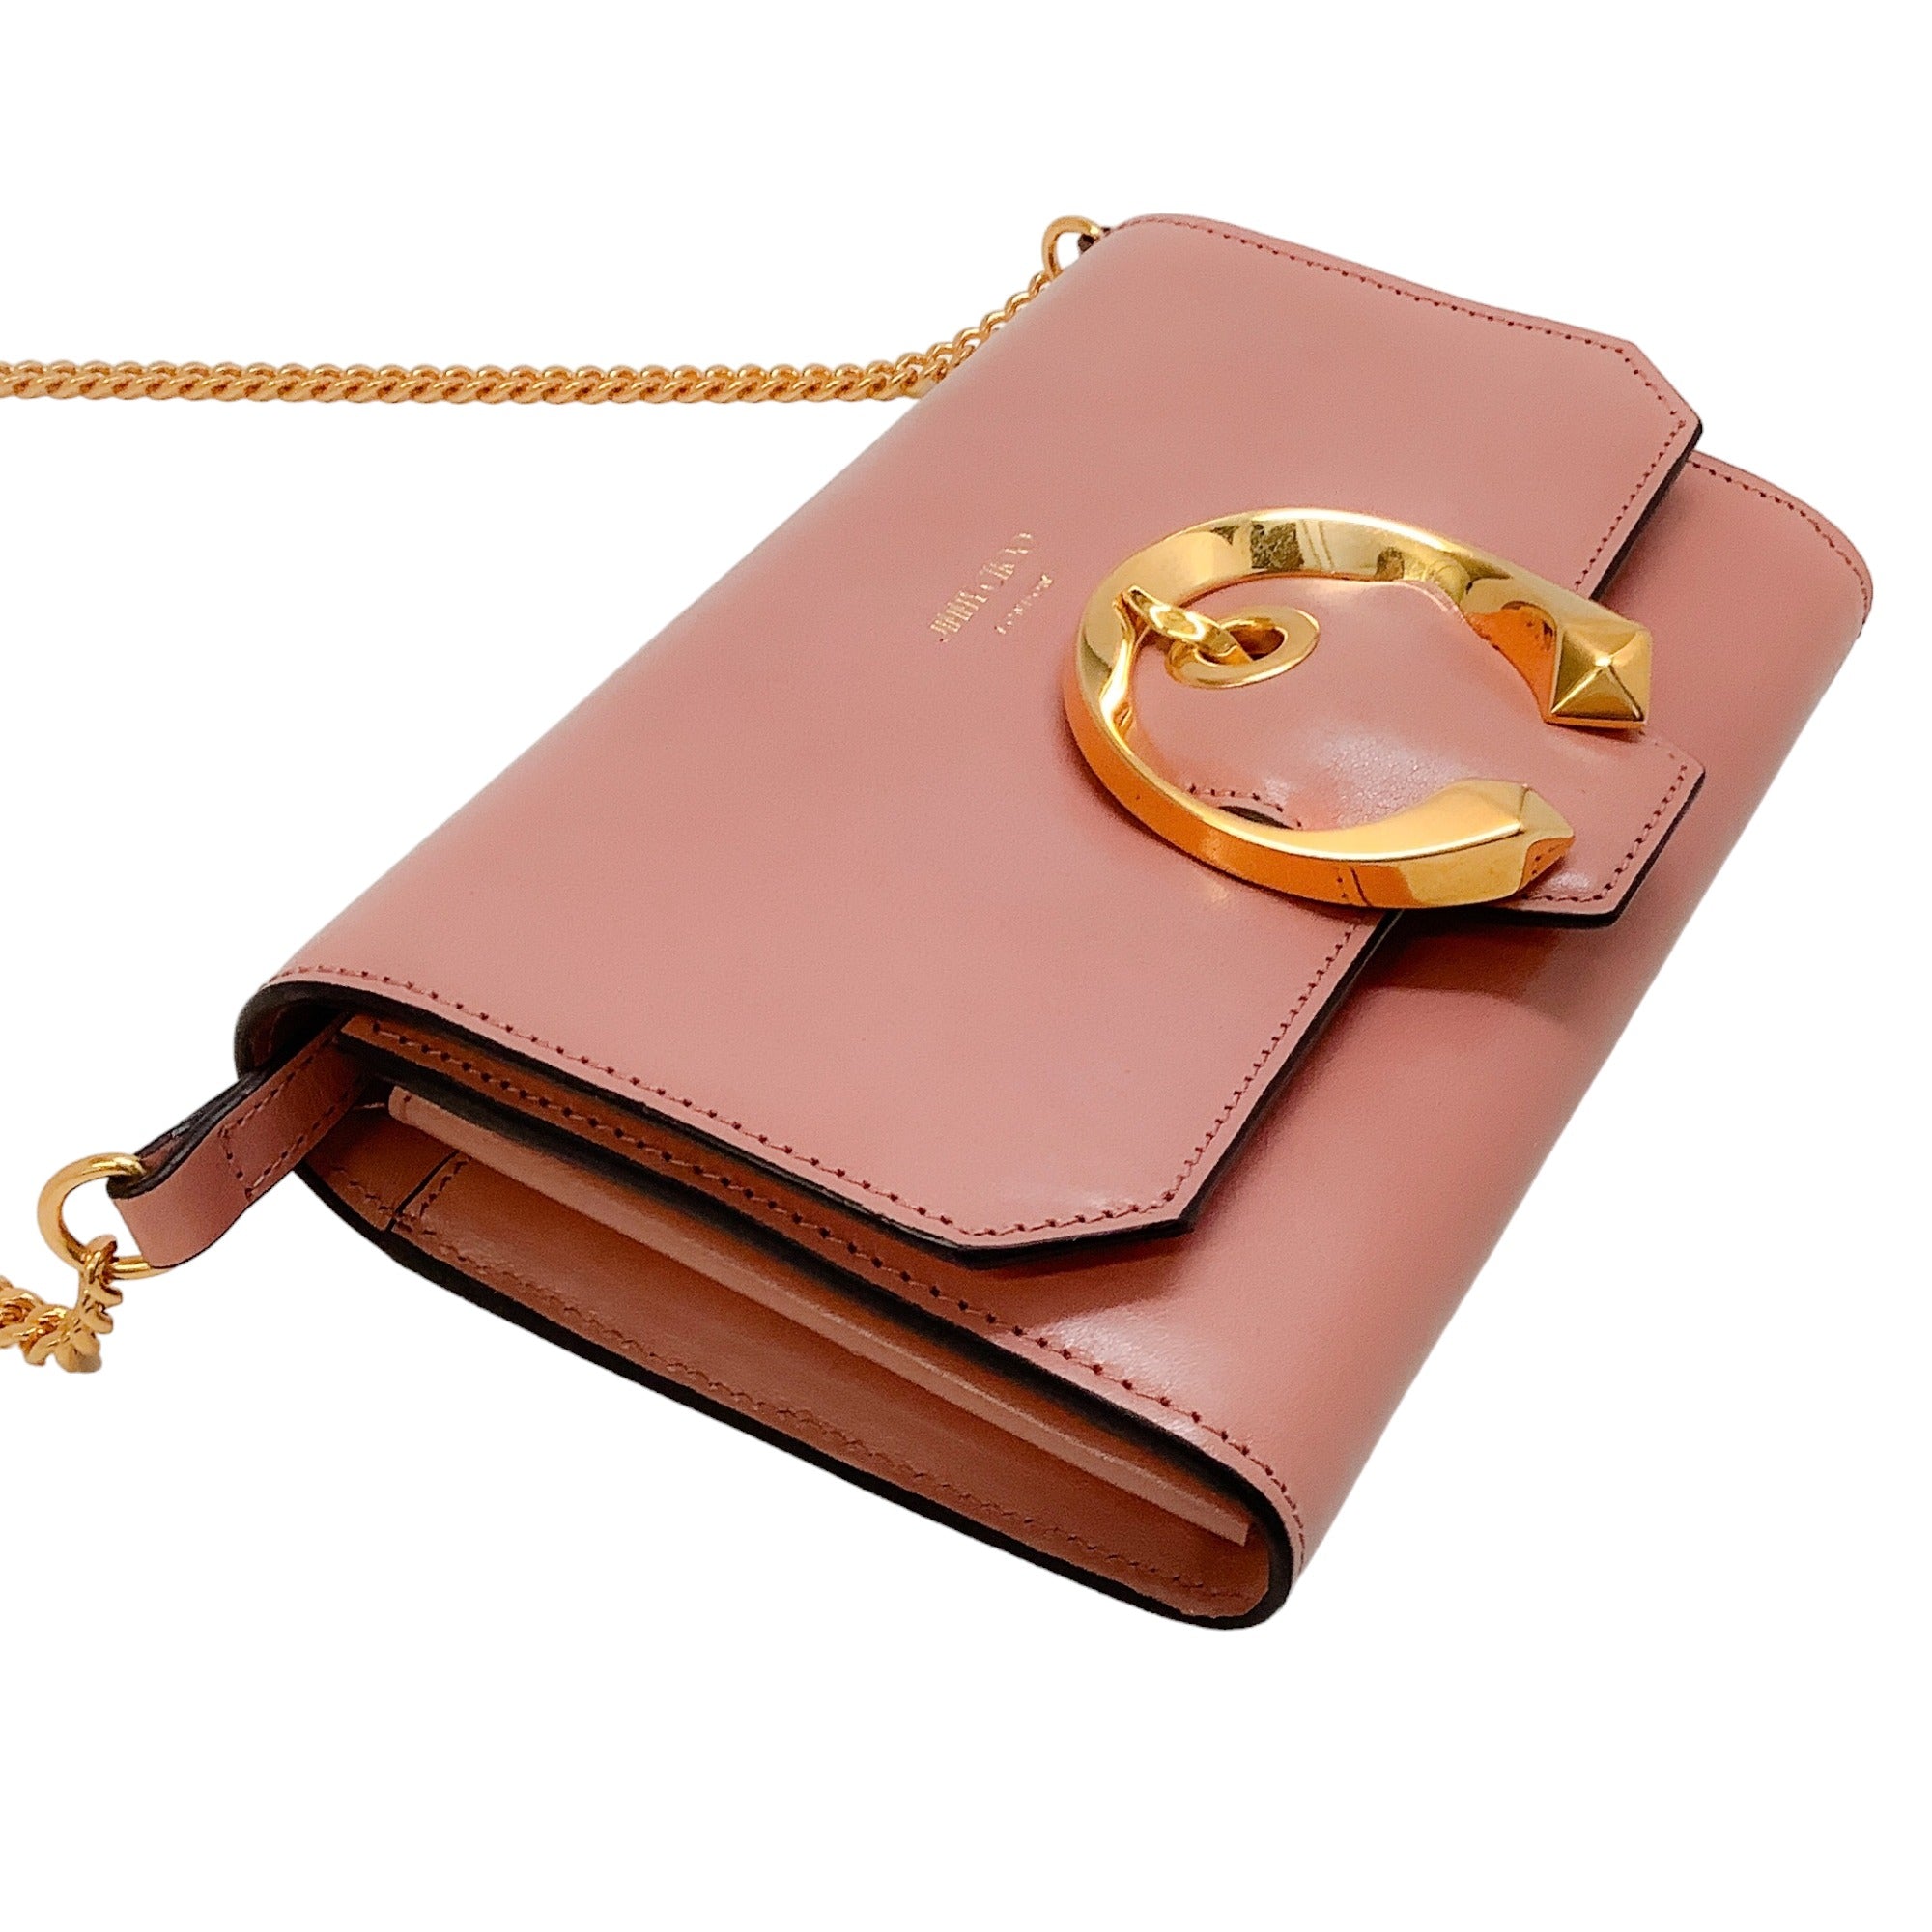 Jimmy Choo Pink Leather Wallet on Chain with Gold Chain Strap